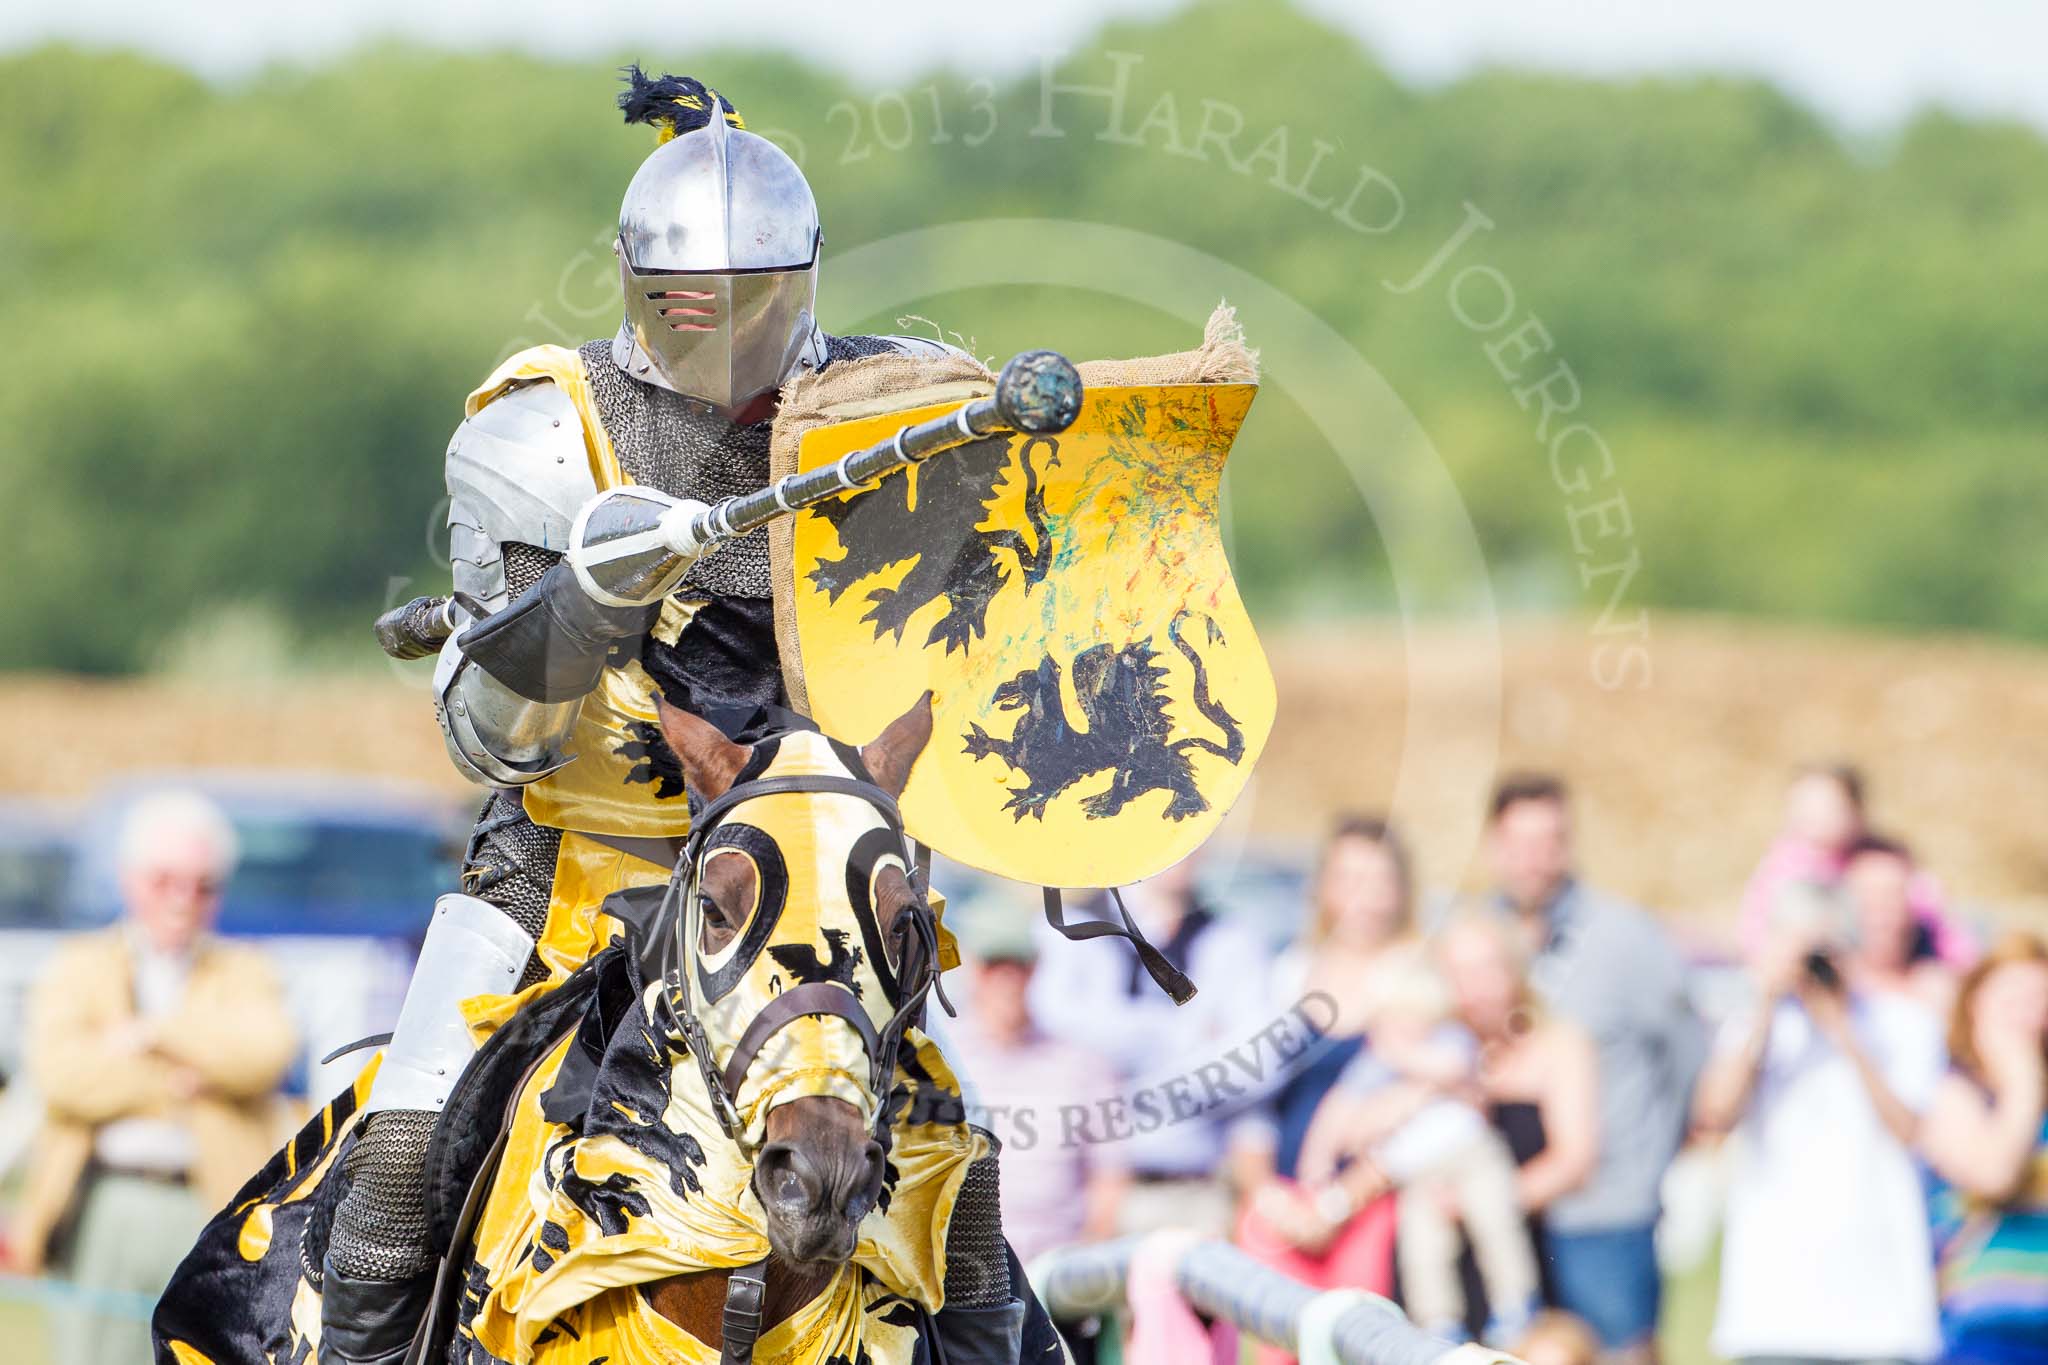 DBPC Polo in the Park 2013 - jousting display by the Knights of Middle England.
Dallas Burston Polo Club, ,
Southam,
Warwickshire,
United Kingdom,
on 01 September 2013 at 15:40, image #498